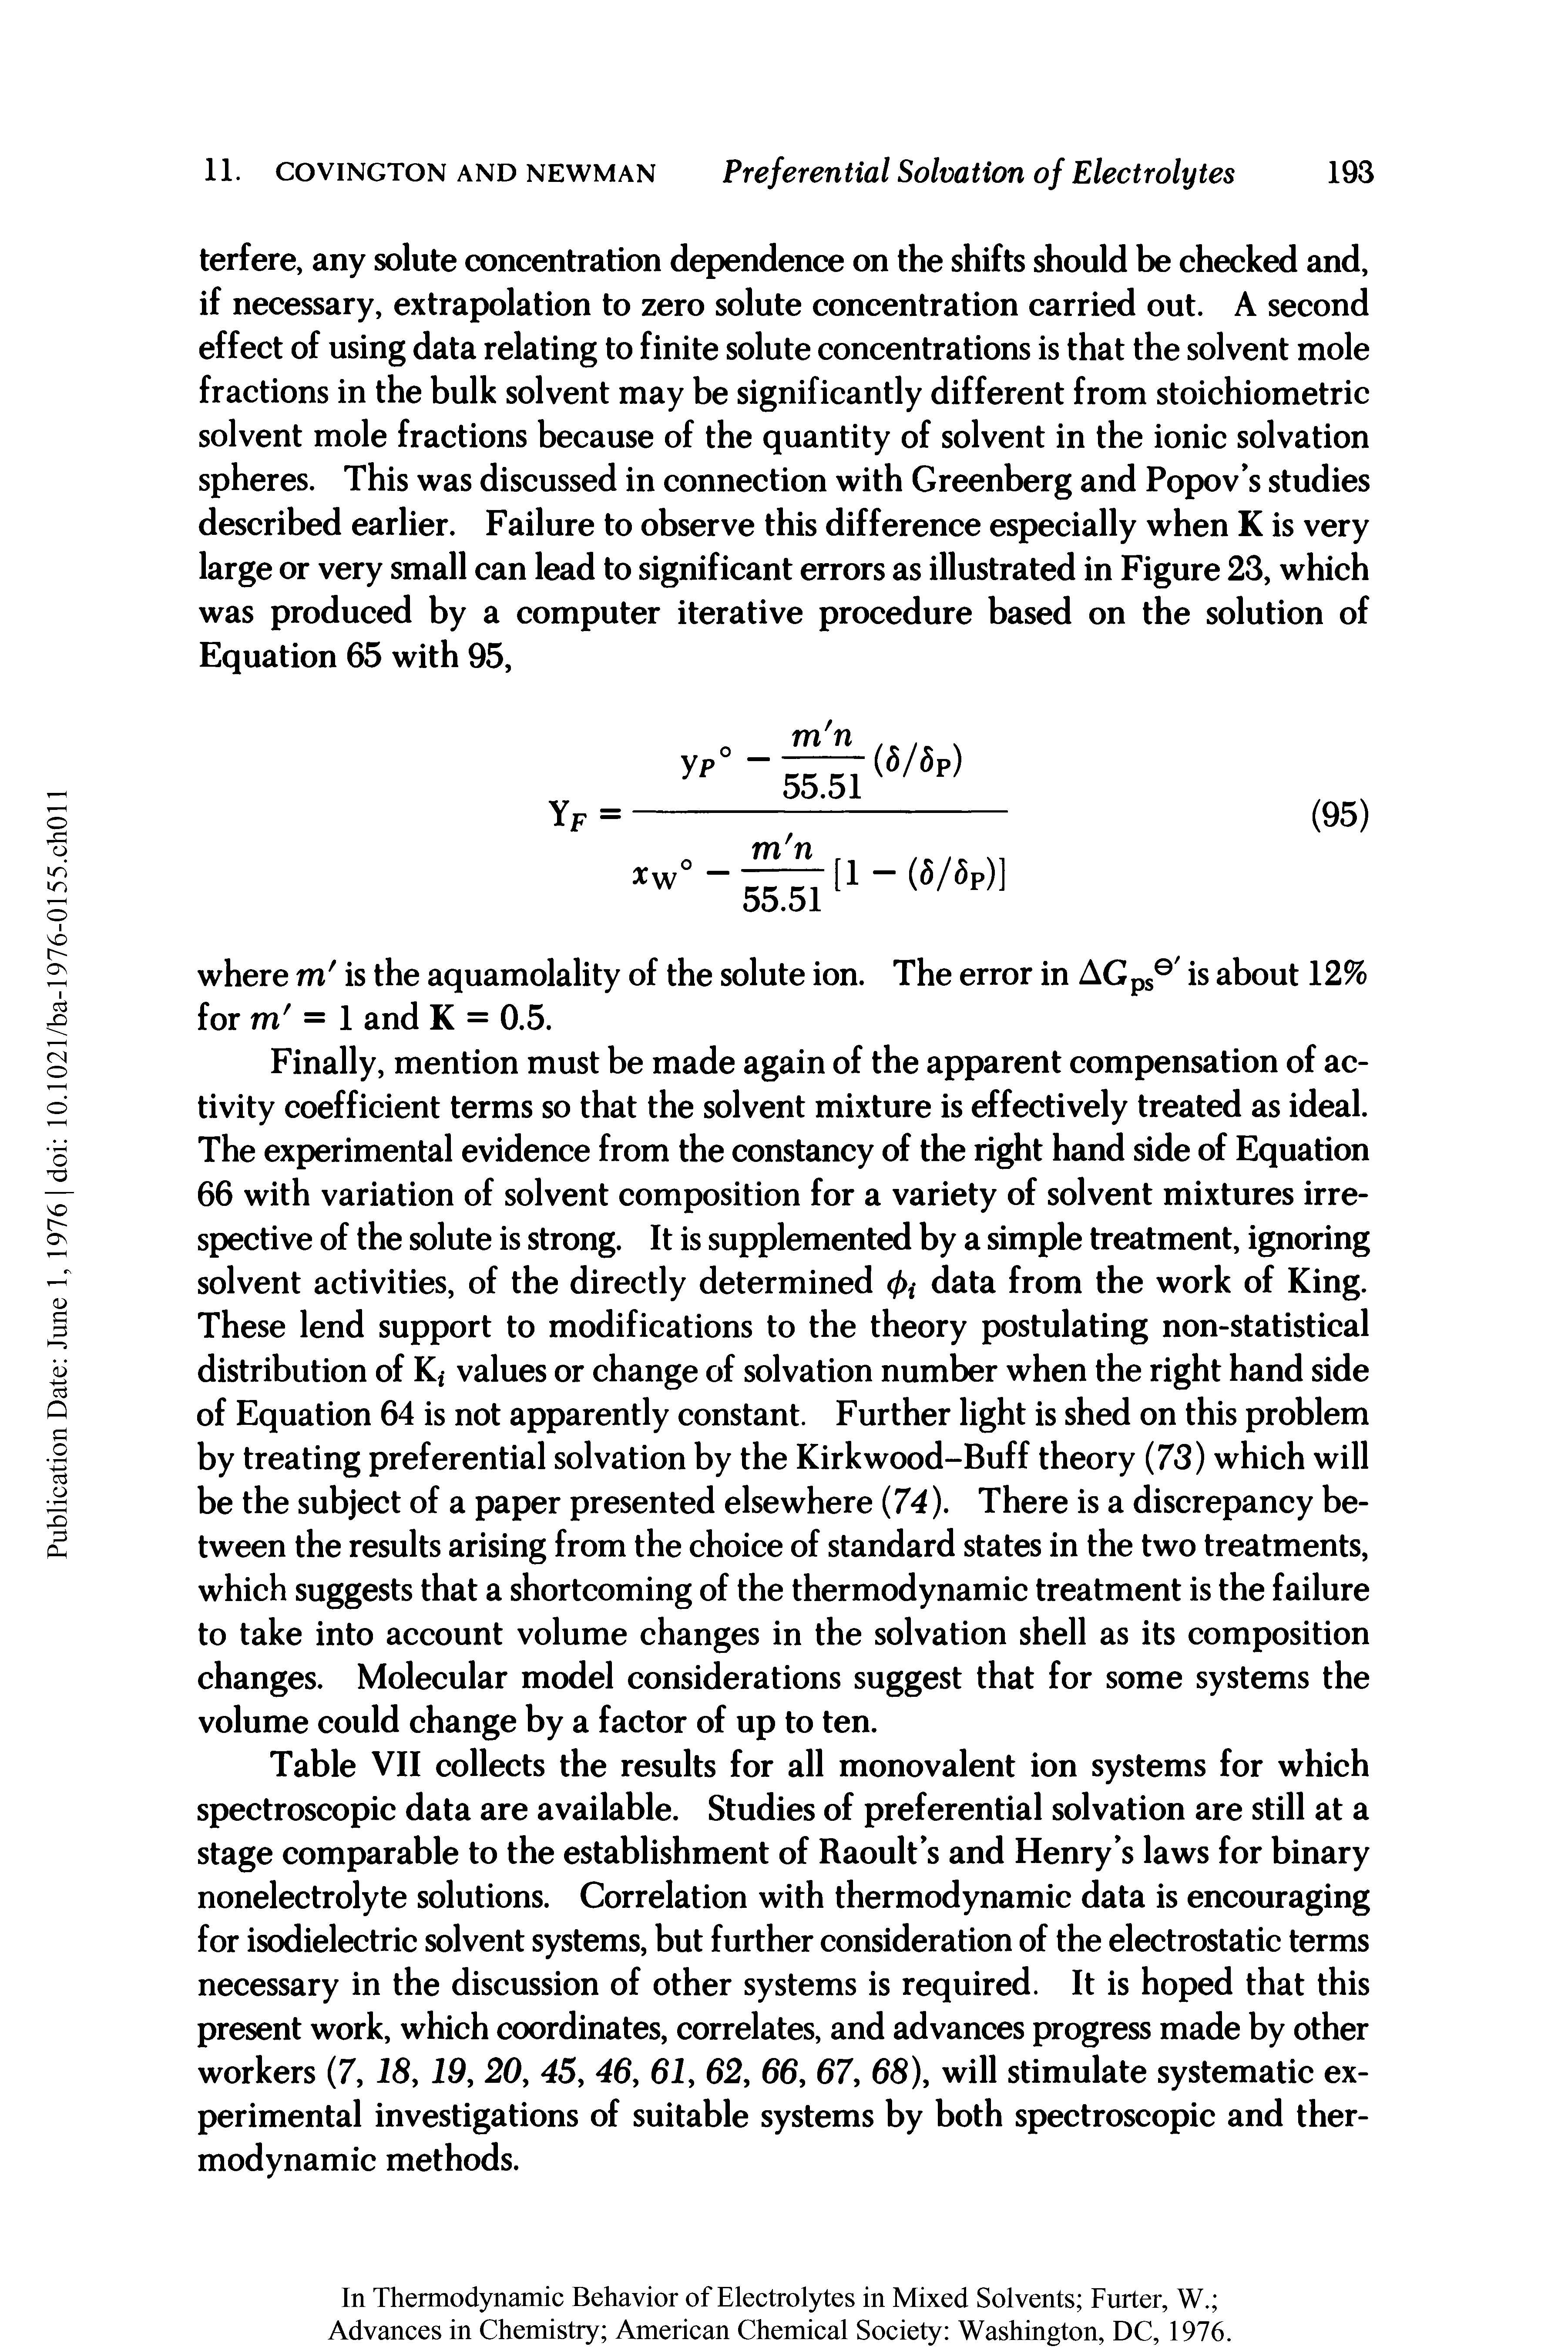 Table VII collects the results for all monovalent ion systems for which spectroscopic data are available. Studies of preferential solvation are still at a stage comparable to the establishment of Raoult s and Henry s laws for binary nonelectrolyte solutions. Correlation with thermodynamic data is encouraging for isodielectric solvent systems, but further consideration of the electrostatic terms necessary in the discussion of other systems is required. It is hoped that this present work, which coordinates, correlates, and advances progress made by other workers (7, 18,19, 20, 45, 46, 61, 62, 66, 67, 68), will stimulate systematic experimental investigations of suitable systems by both spectroscopic and thermodynamic methods.